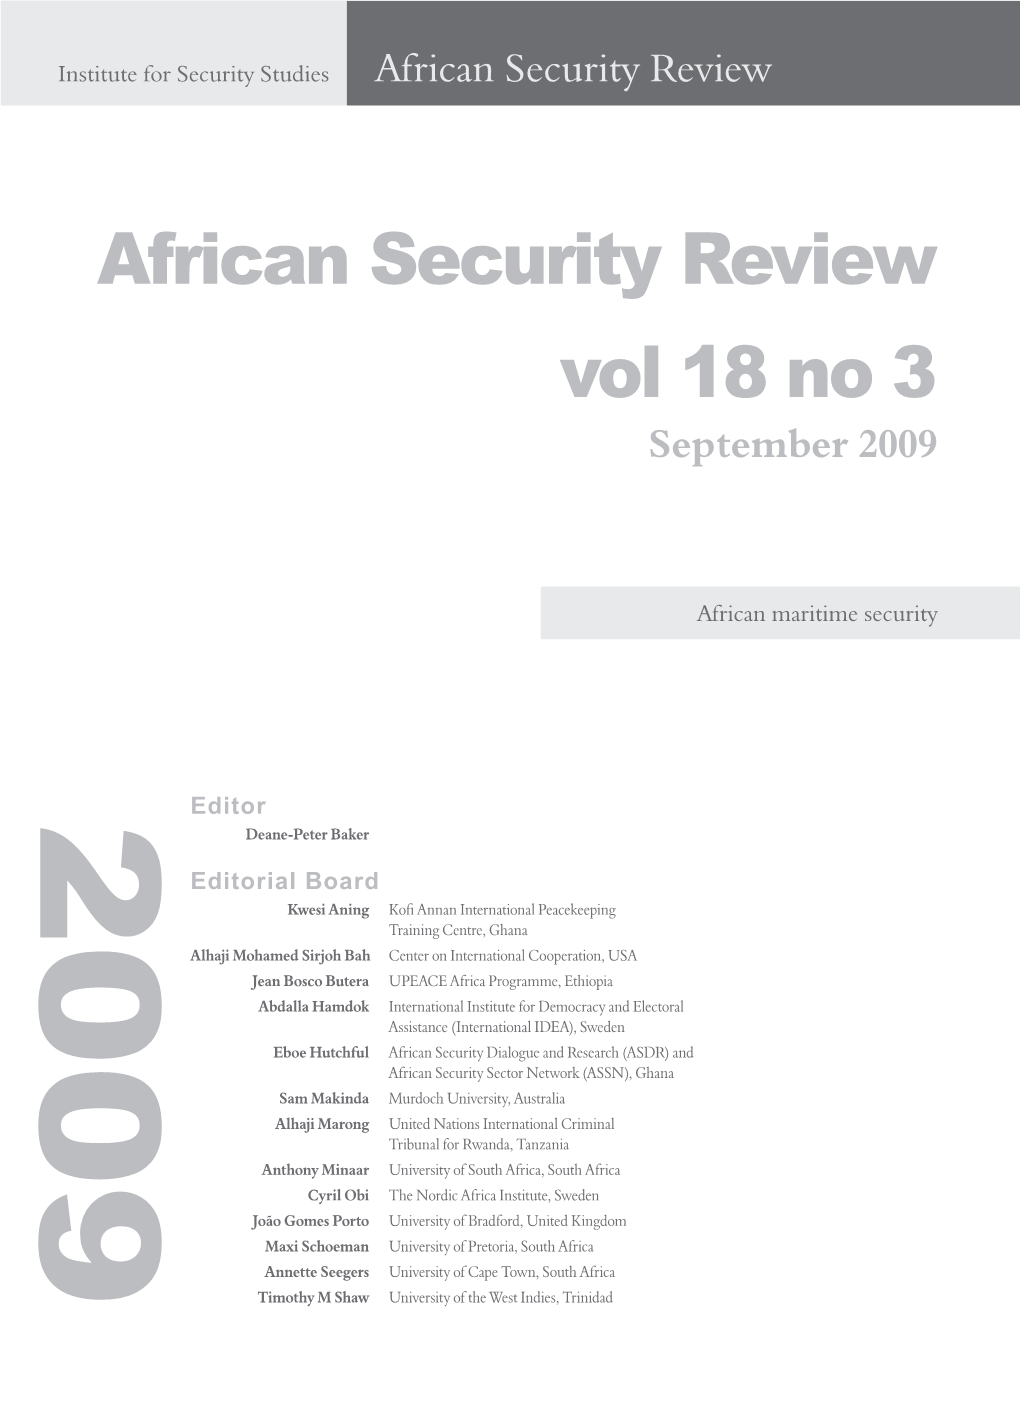 African Security Review, Vol 18 No 3